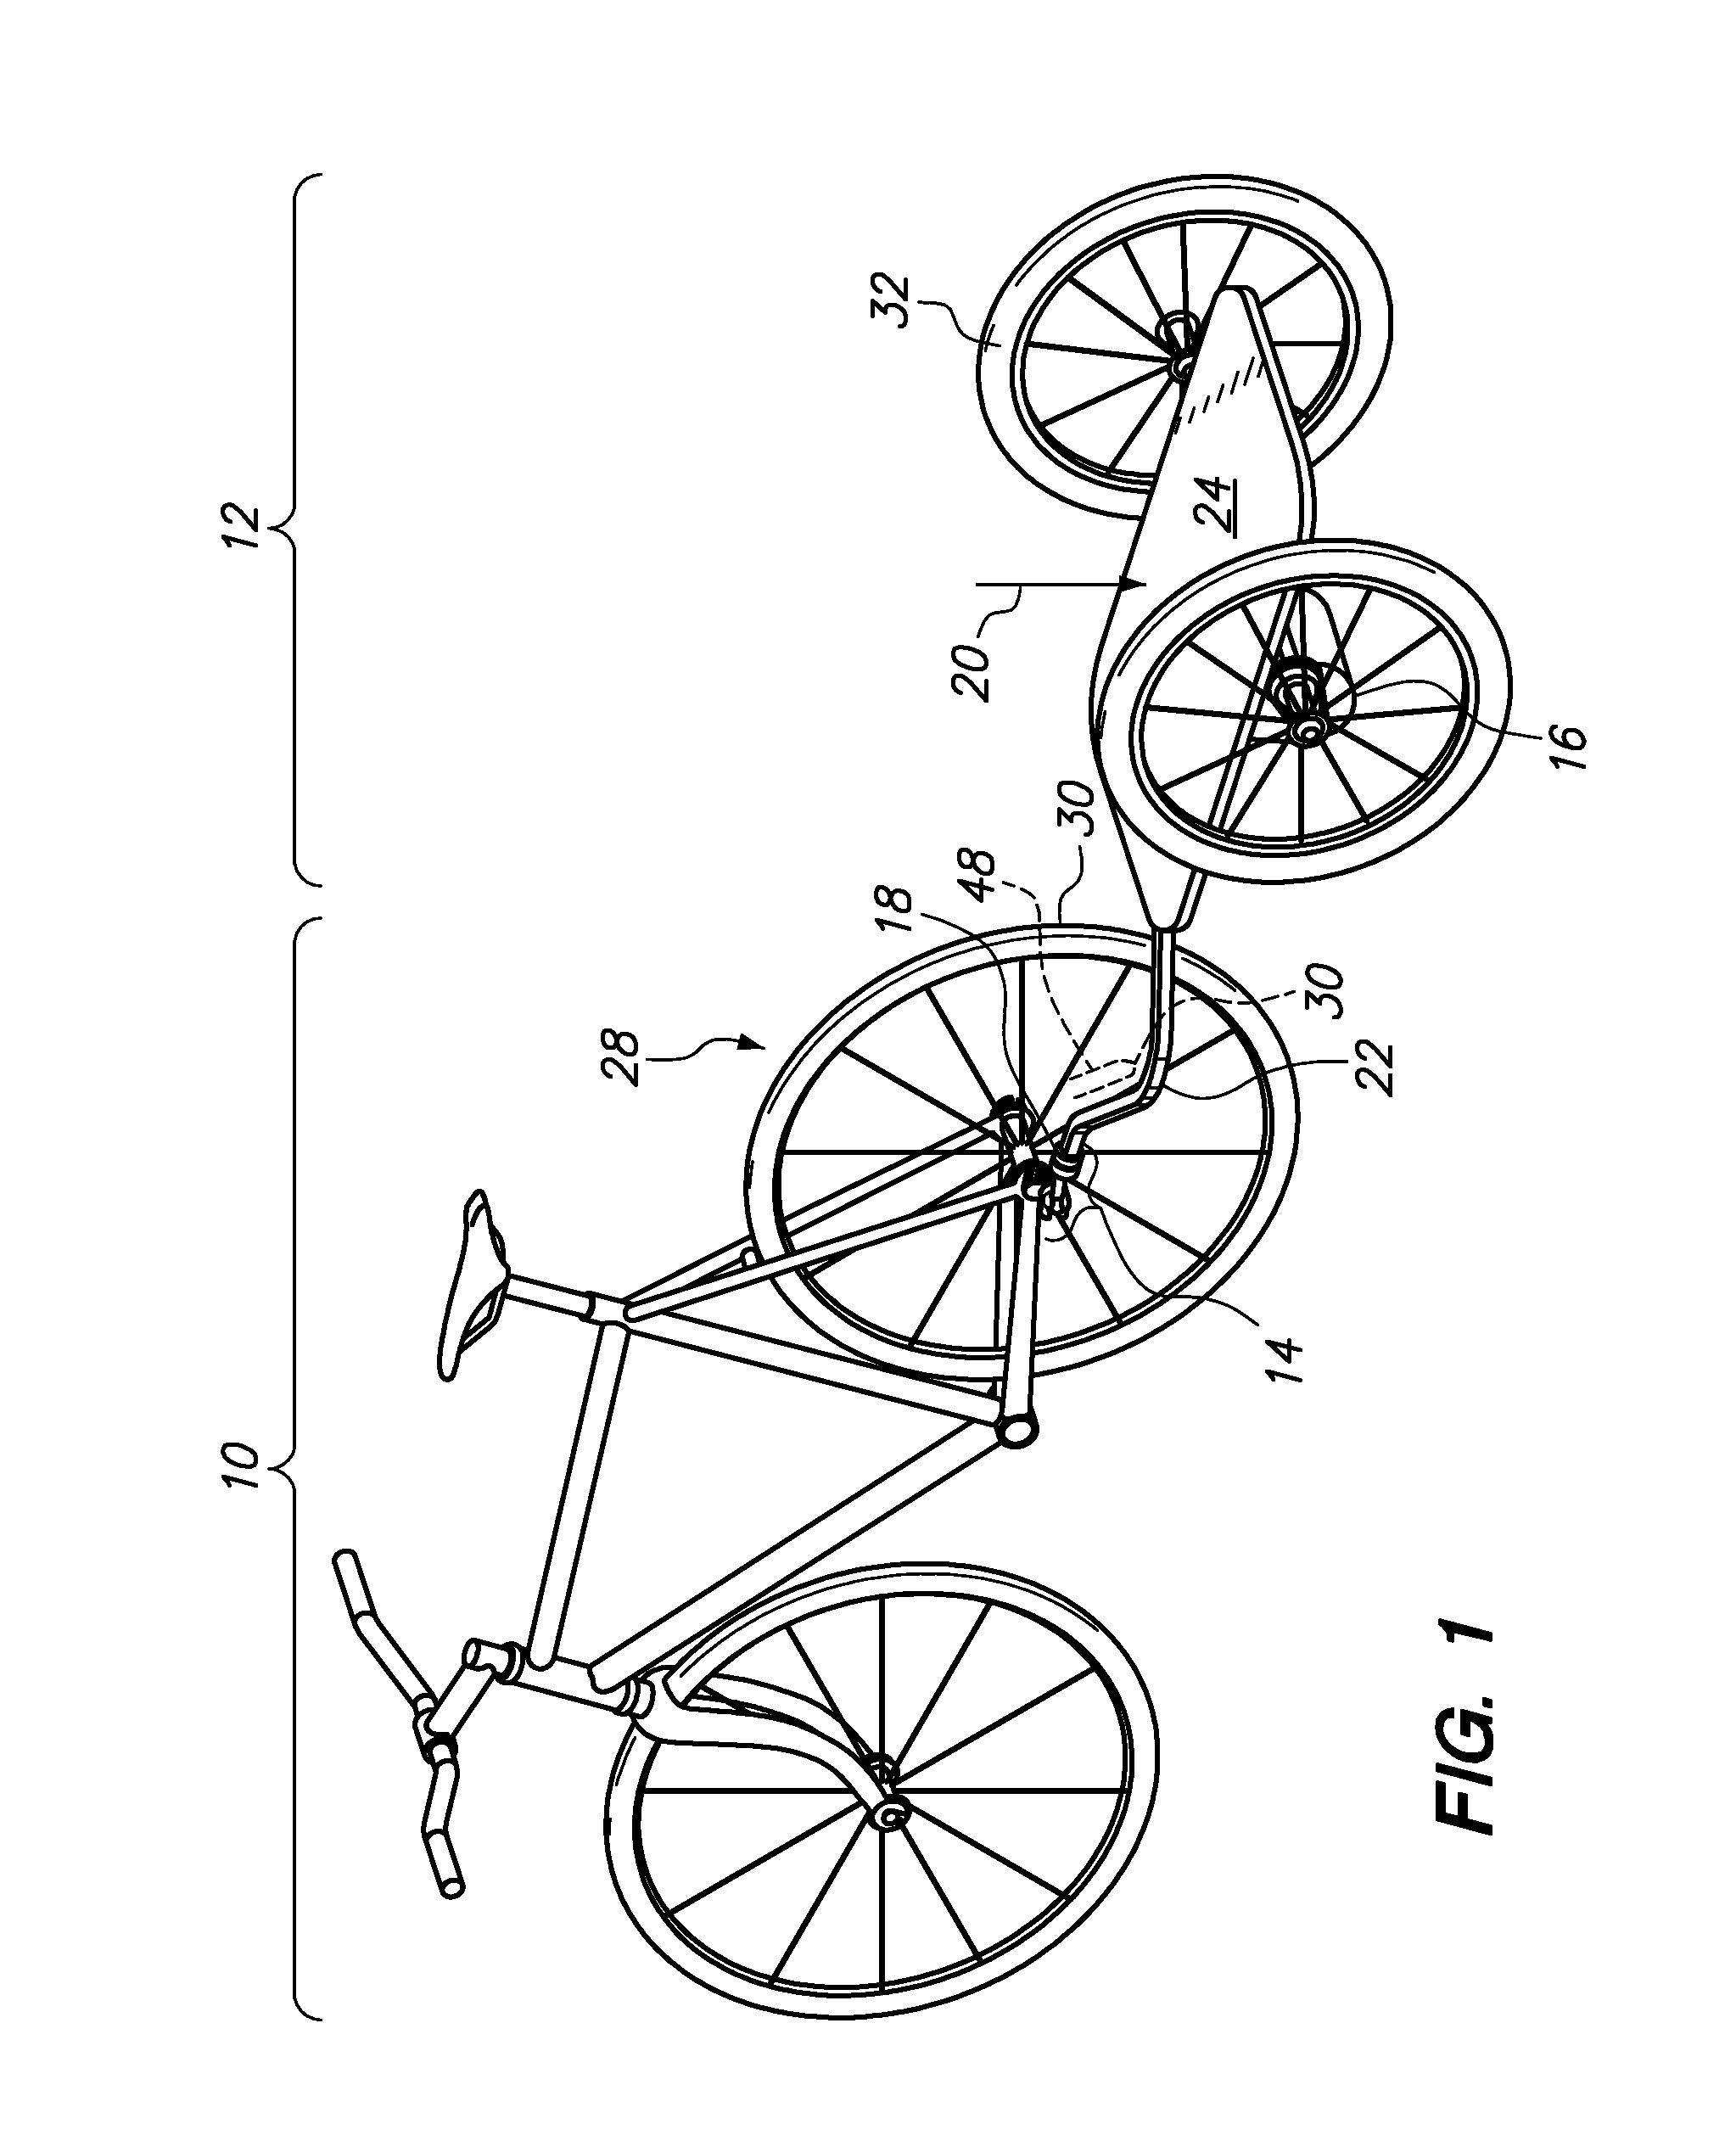 Motor Powered Bicycle Trailer with Integral Hitch Force Metering